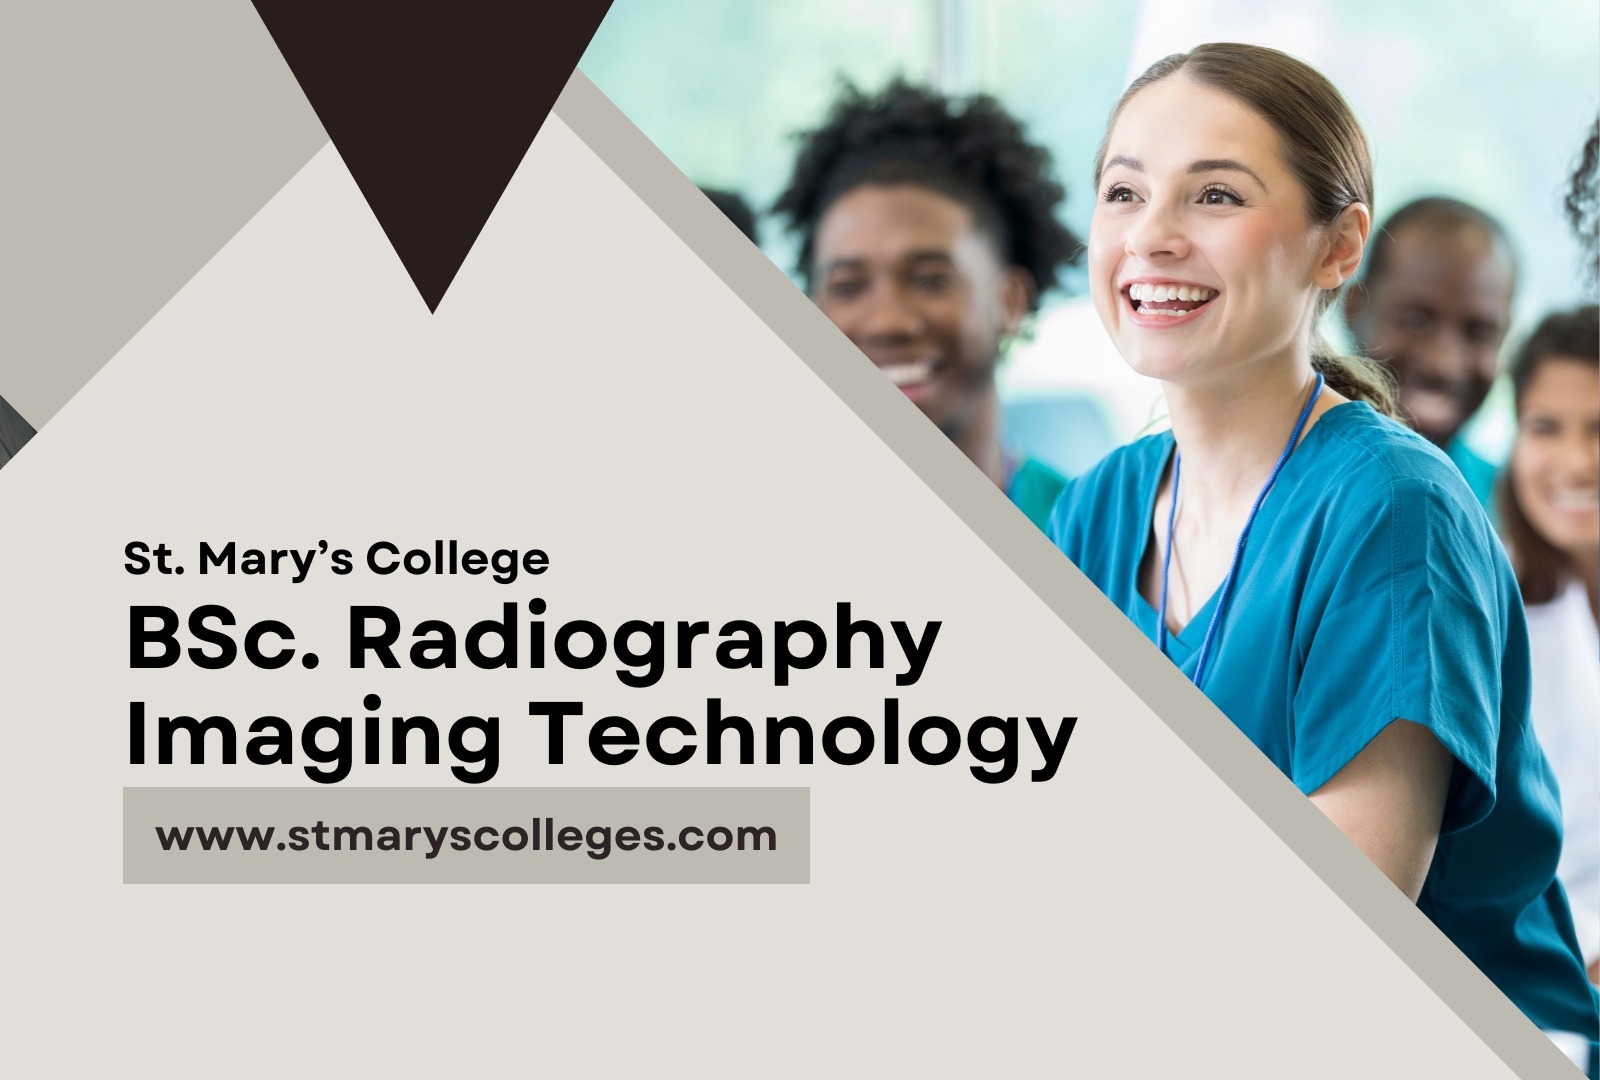 BSC. RADIOGRAPHY IMAGING TECHNOLOGY